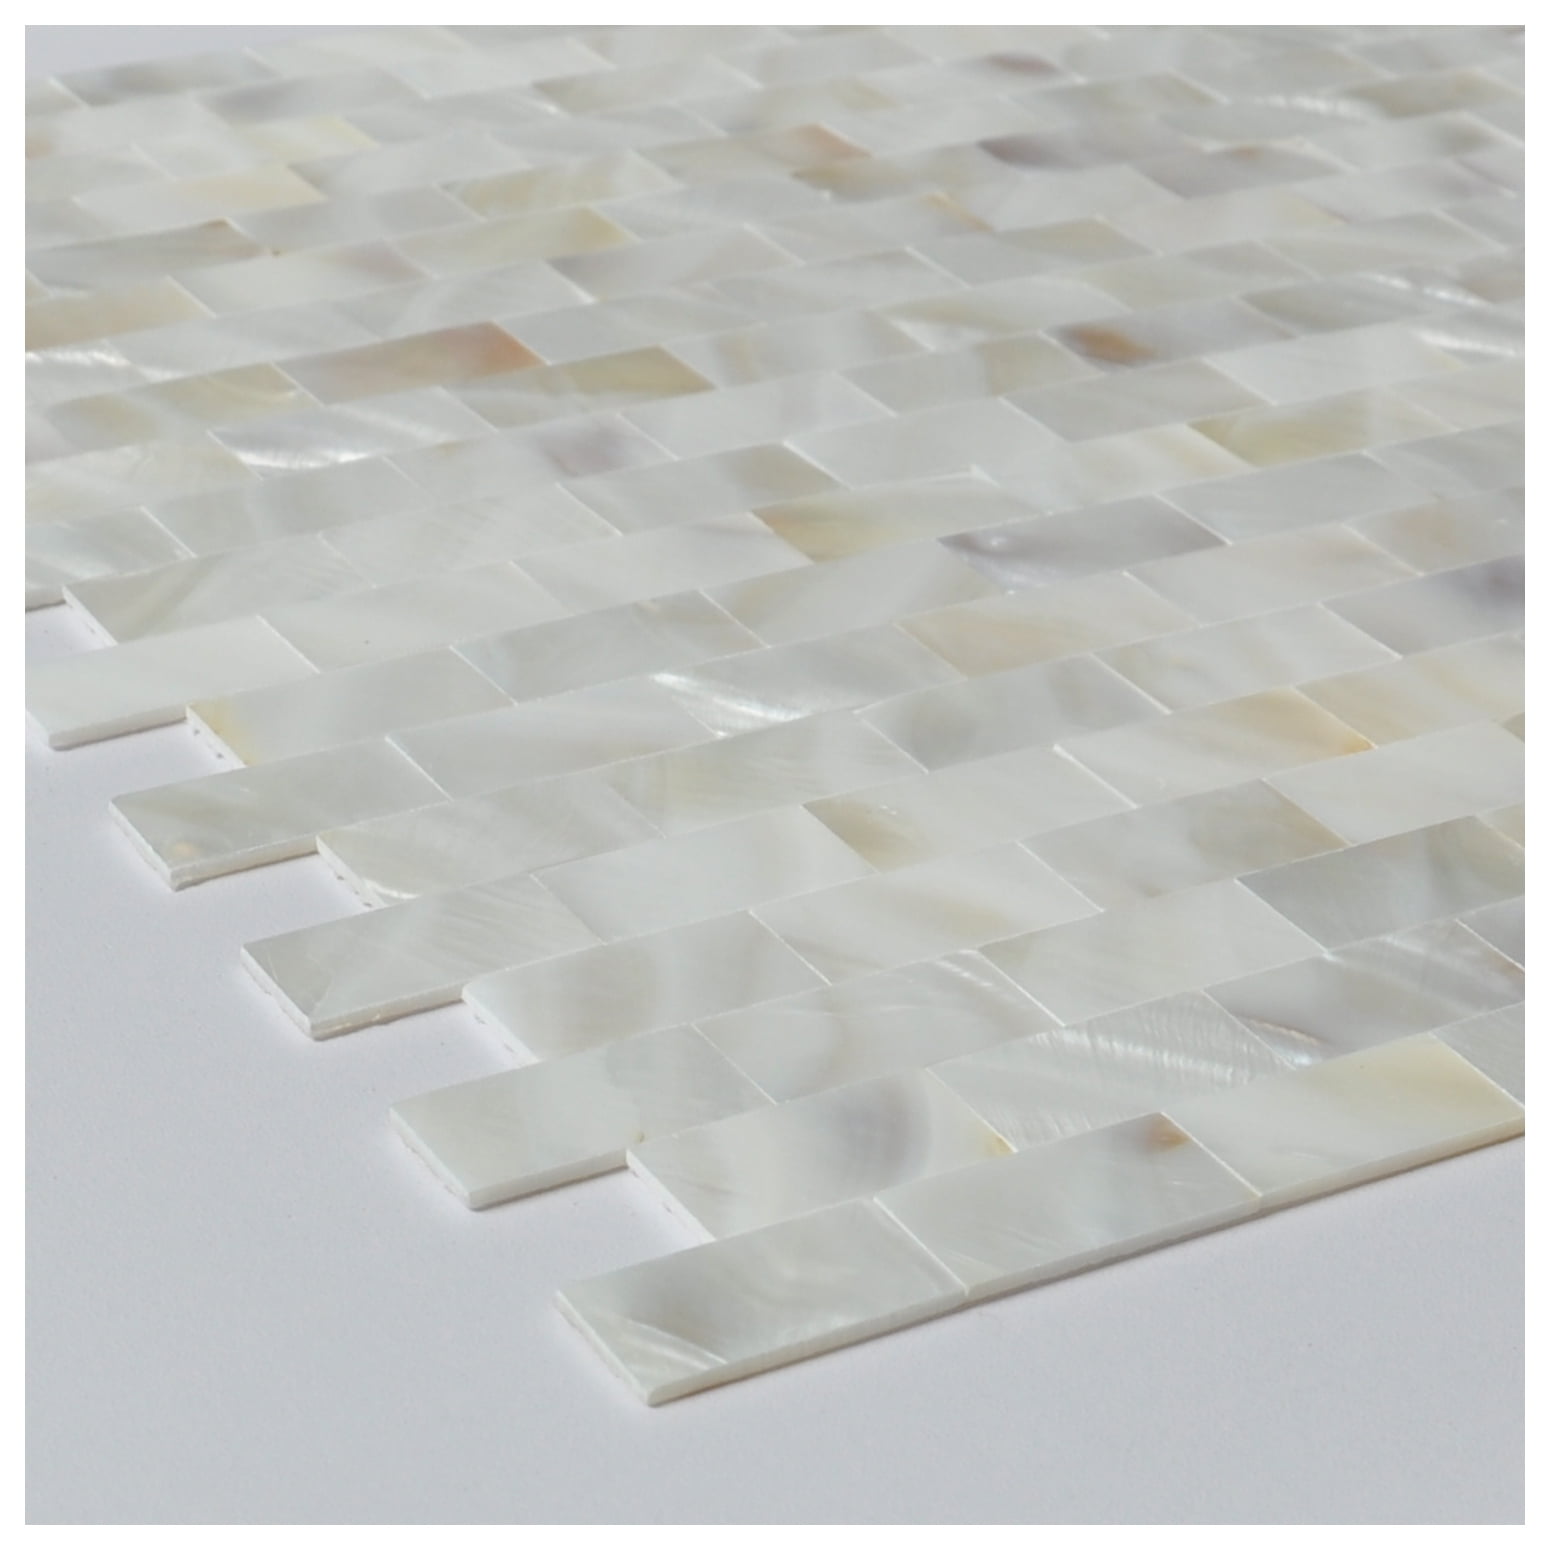 Art3d 10 Pieces 12 inch x12 inch Mother of Pearl Shell Mosaic Tile for Kitchen Backsplash Wall Tile GroutLess Subway, Size: 11.81 inch x 11.81 inch x